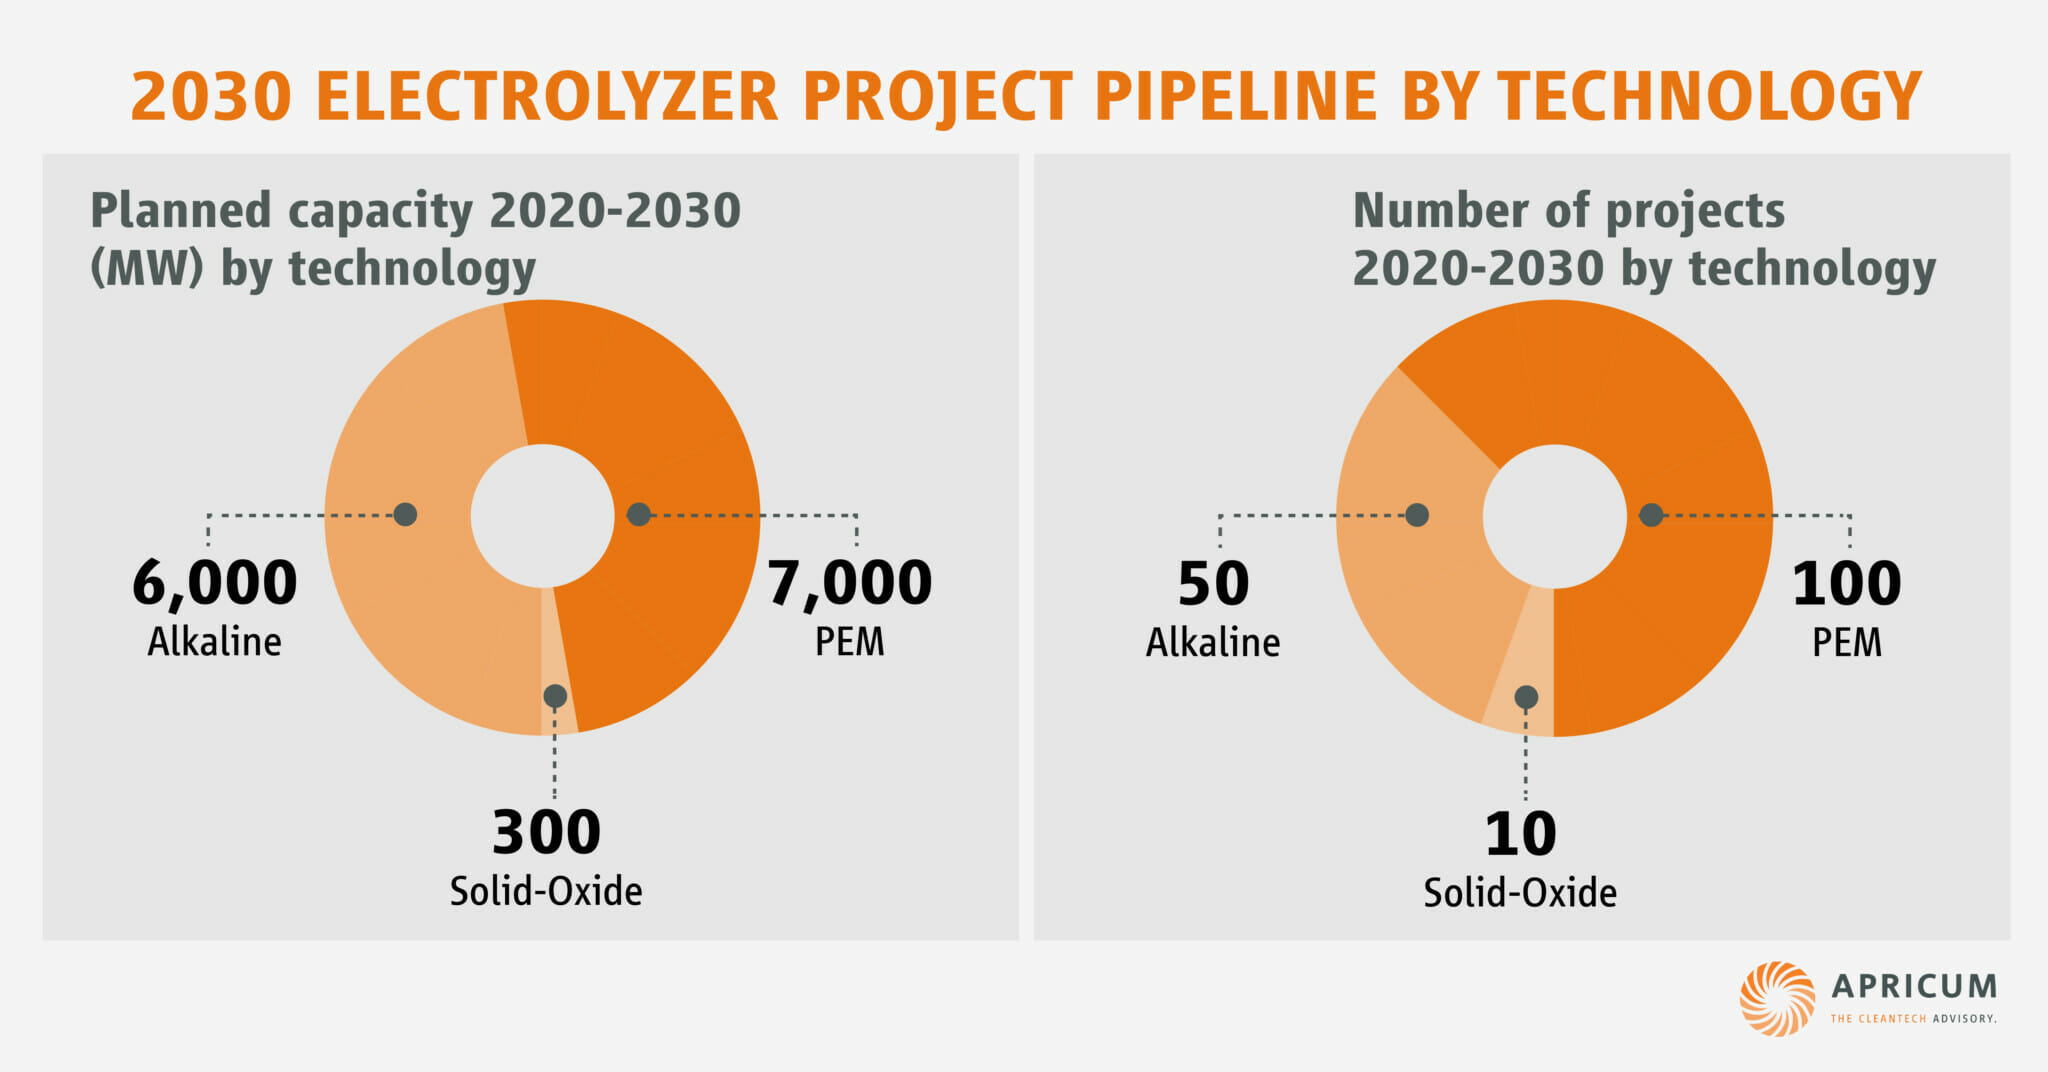 Apricum - 2030 electrolyzer project pipeline by technology